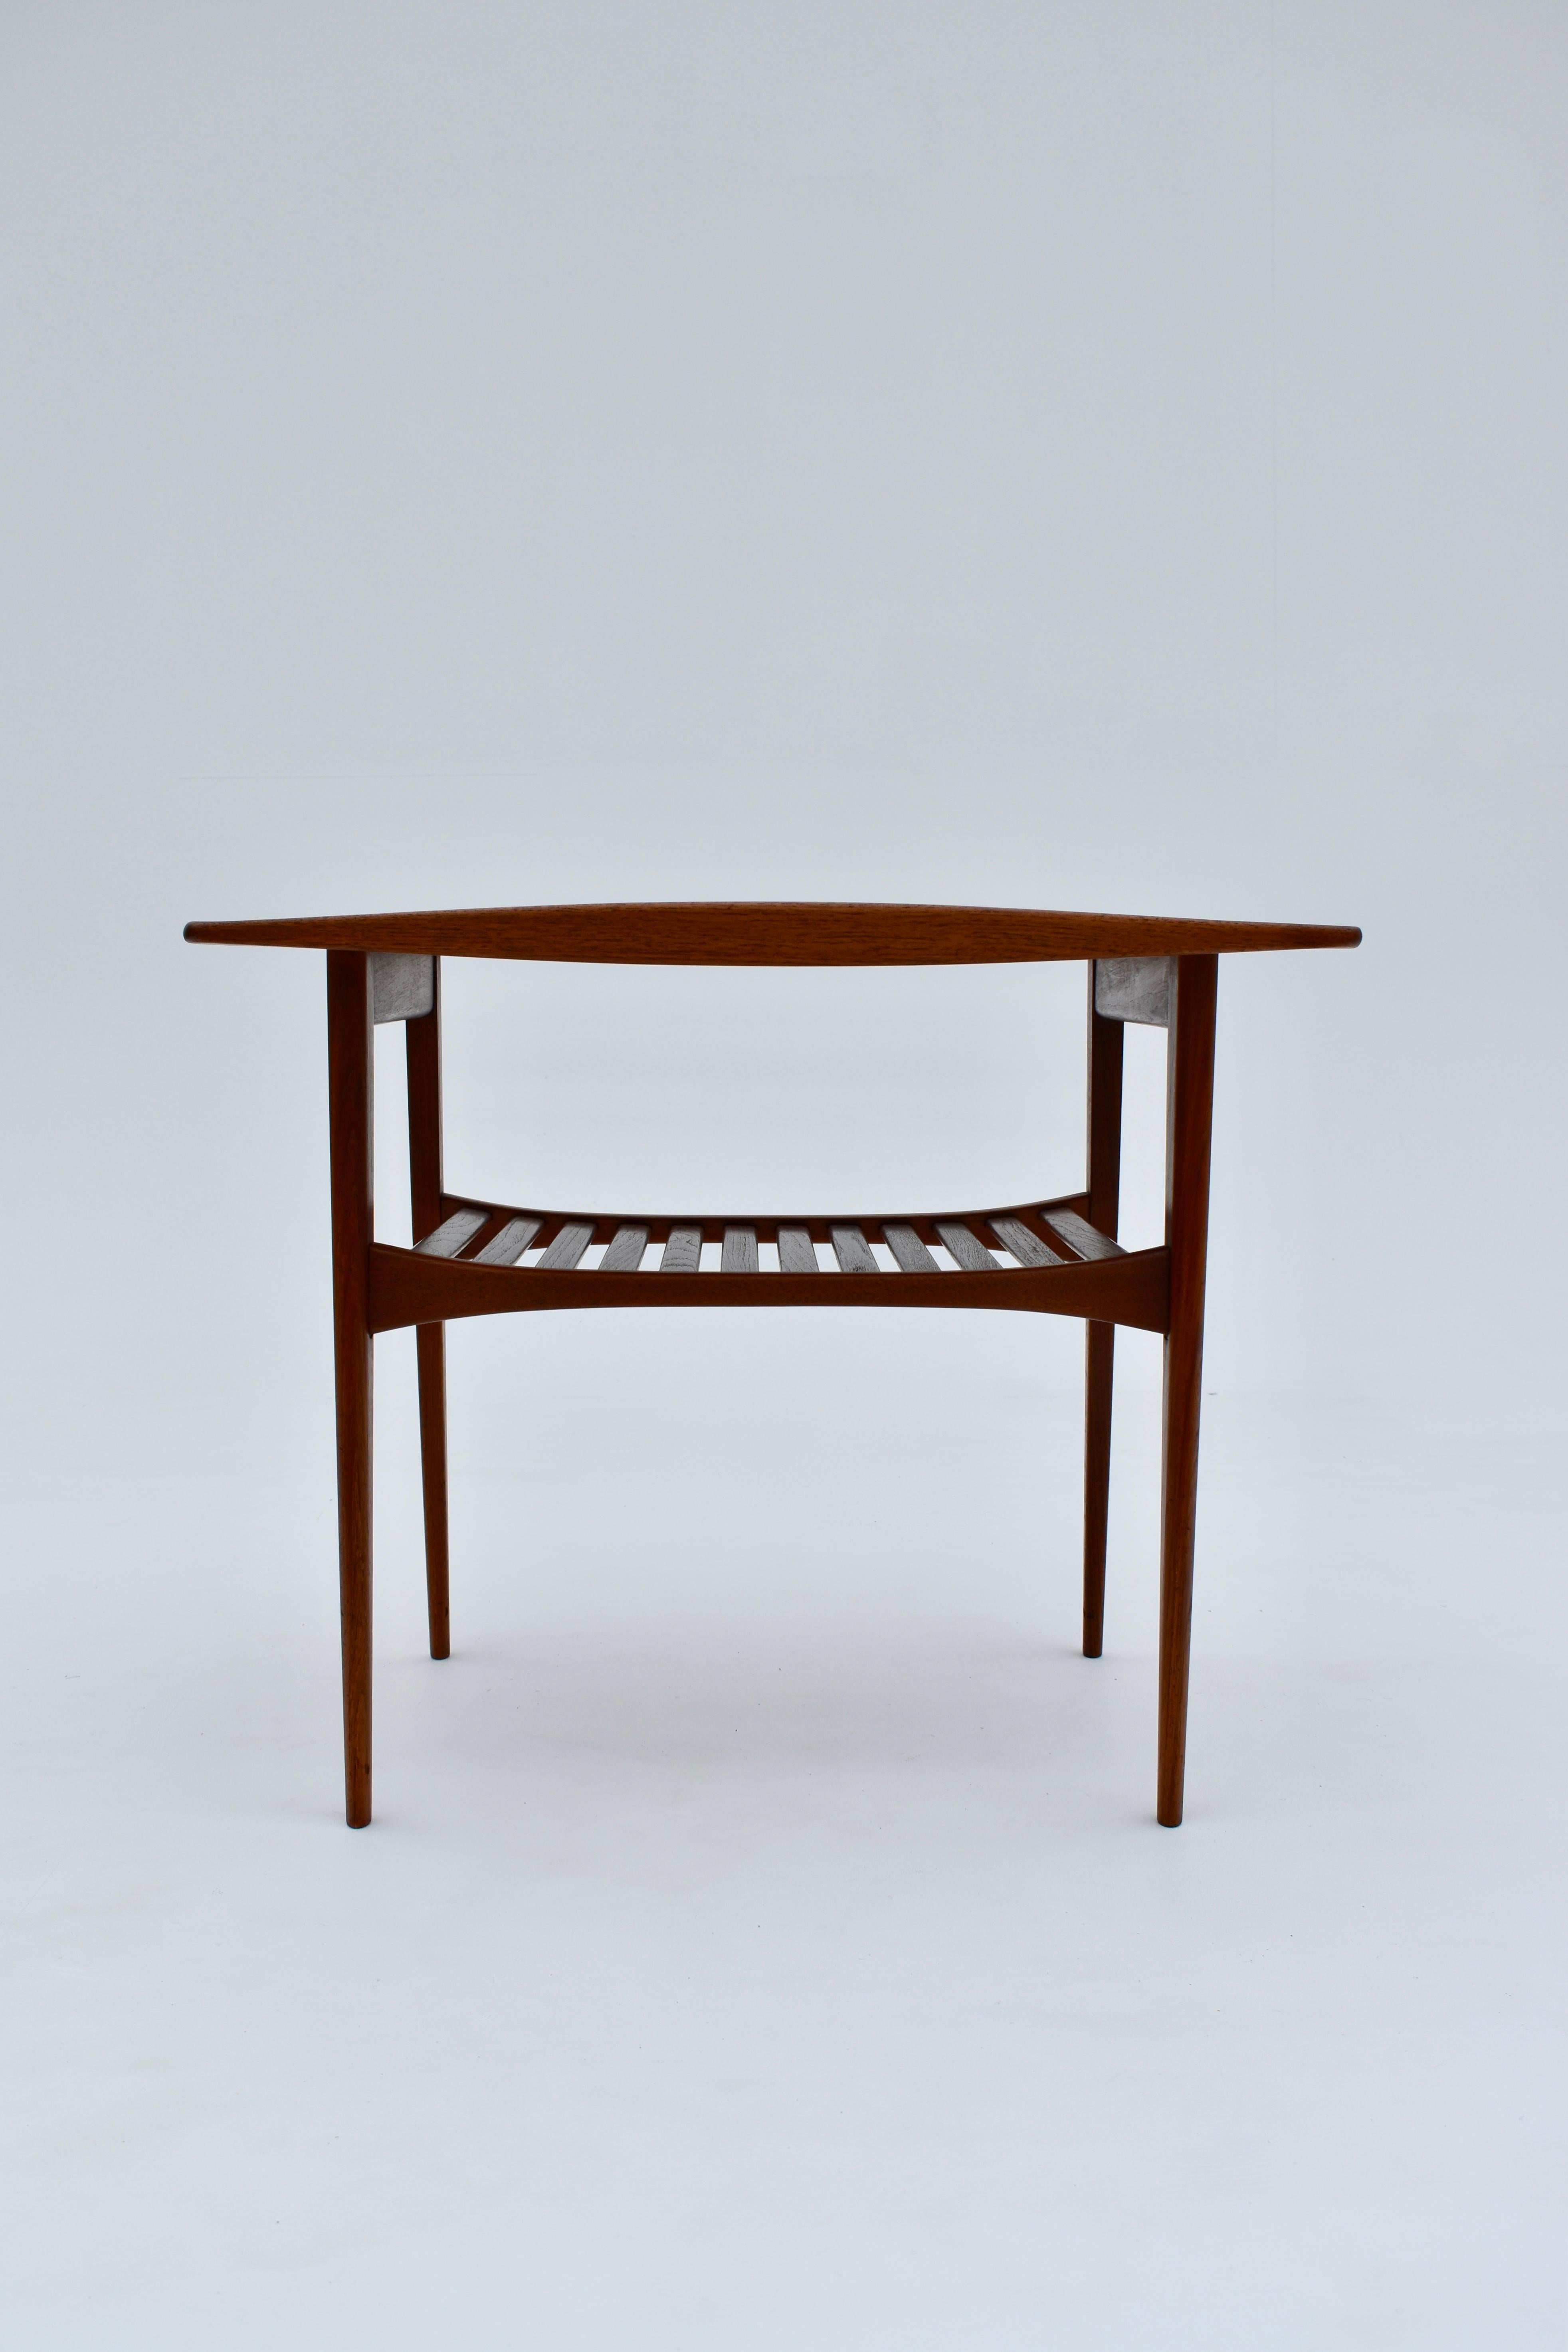 An extremely elegant and beautifully detailed side or lamp table designed by Tove & Edvard Kindt Larsen for France & Son, Denmark.

This design showcases the incredible craftsmanship and quality of France & Son products at the time. The slatted